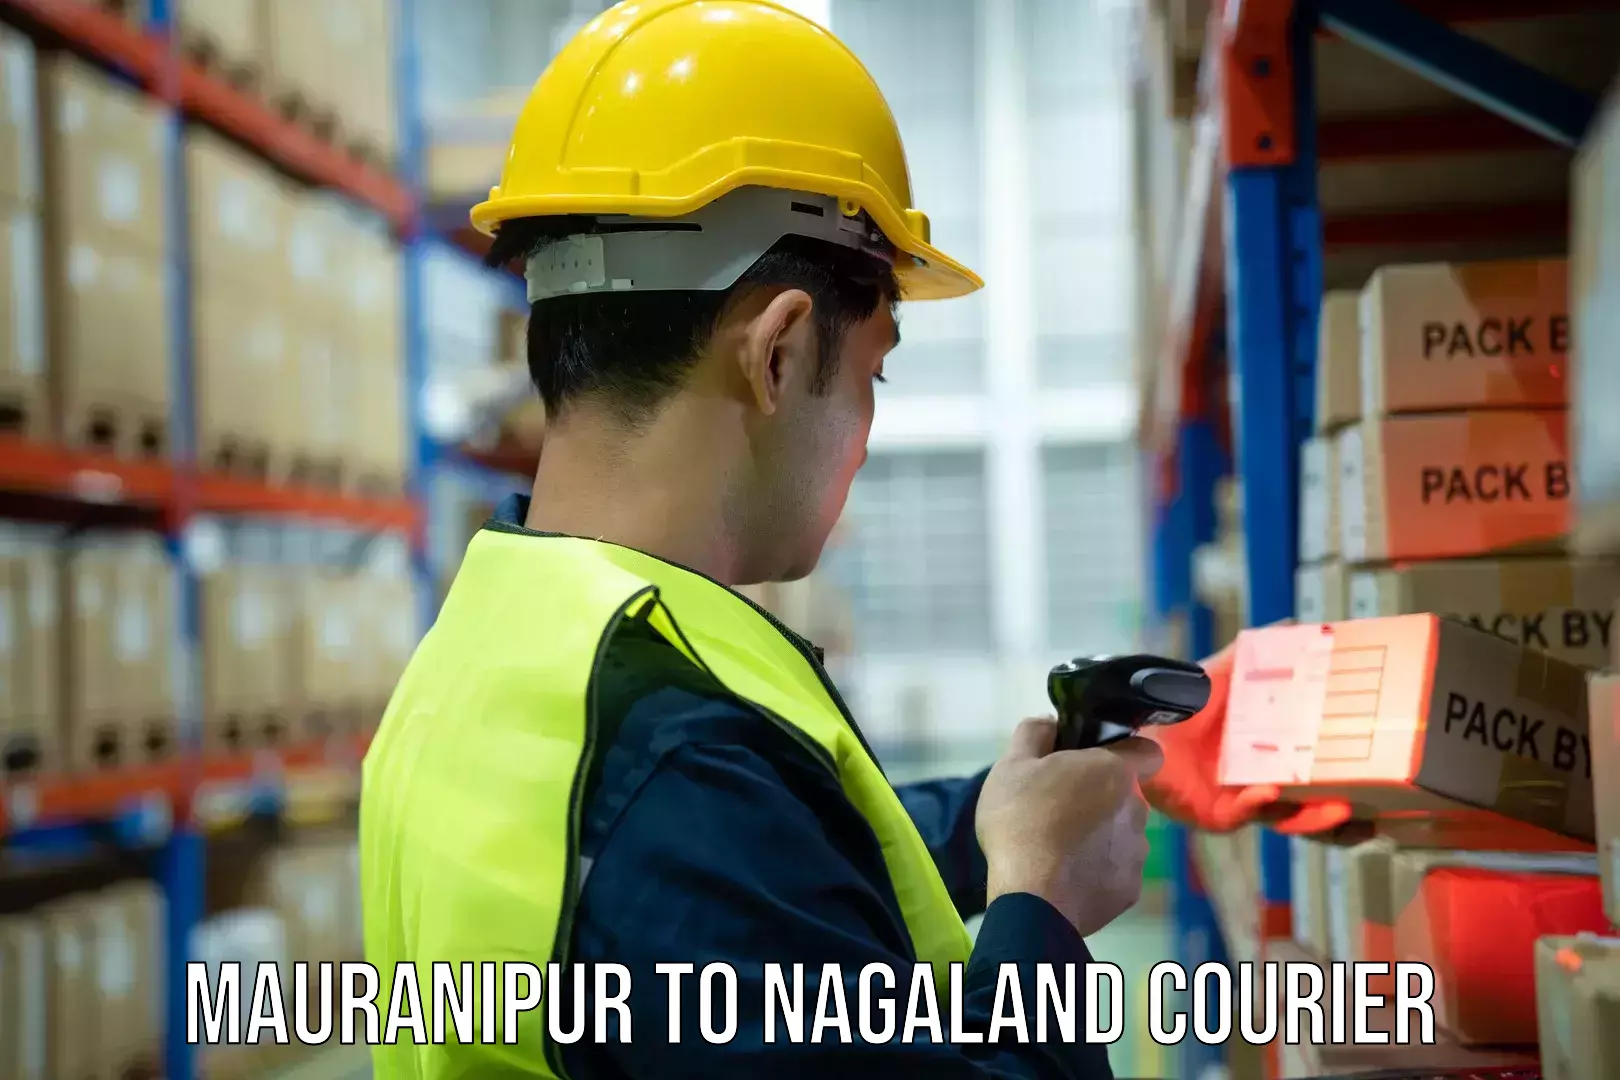 Urban courier service Mauranipur to Nagaland